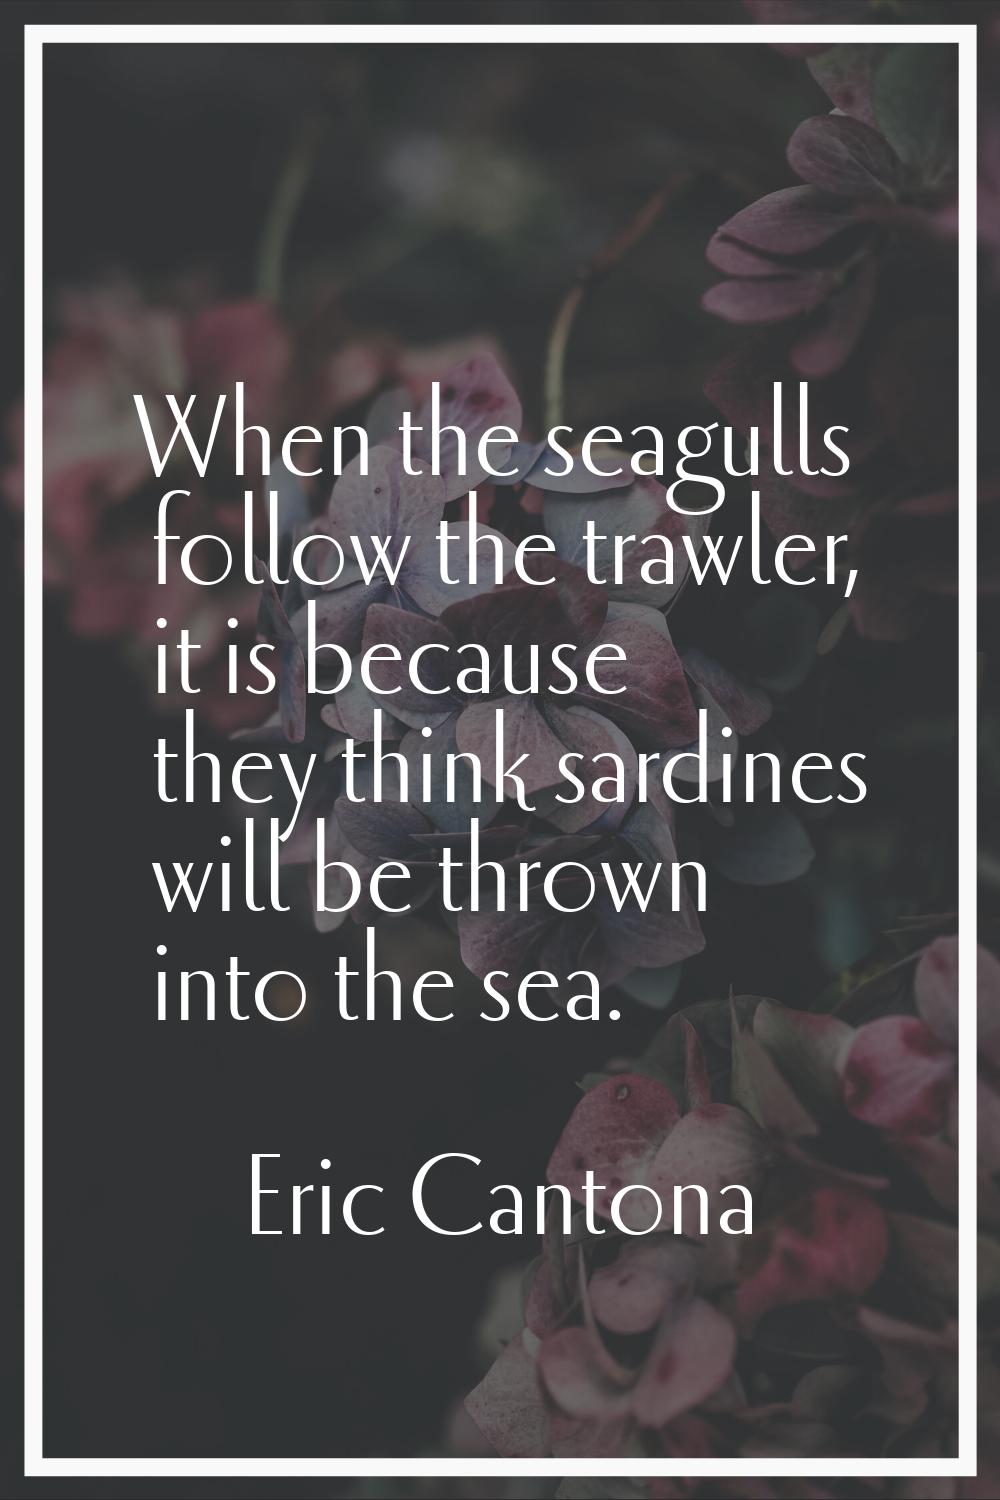 When the seagulls follow the trawler, it is because they think sardines will be thrown into the sea